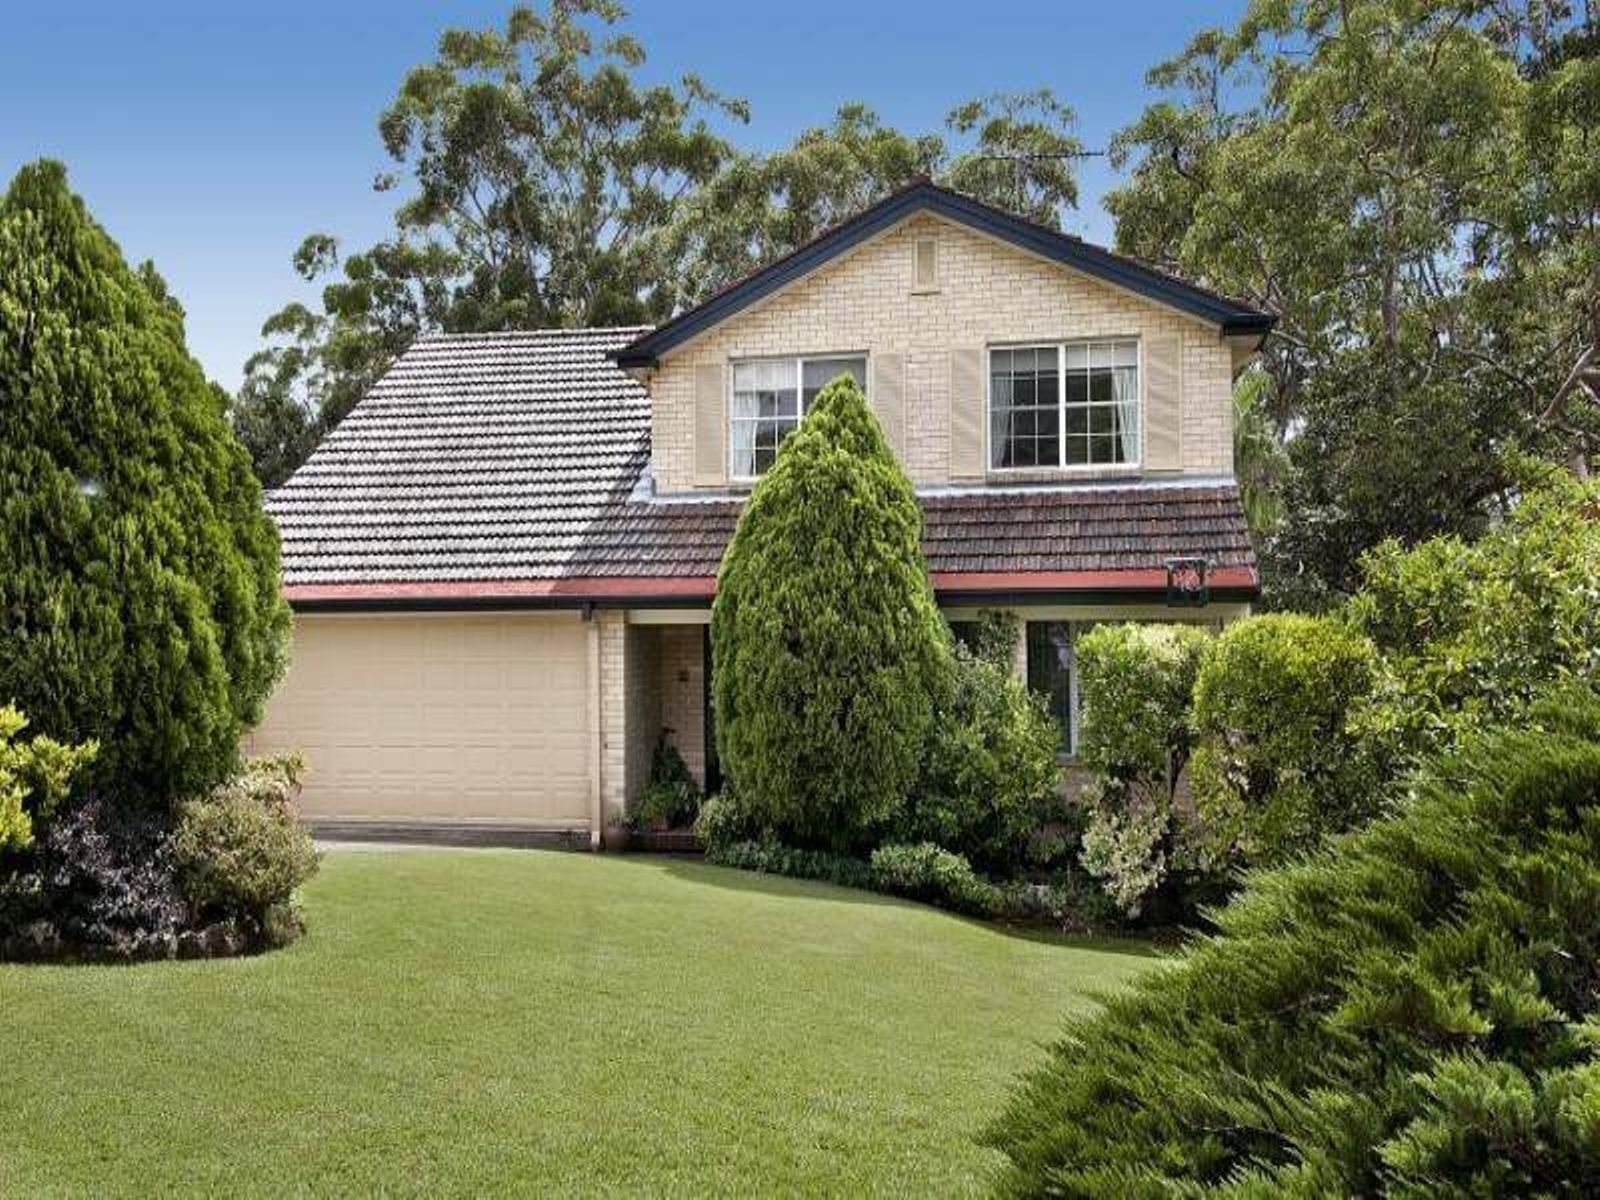 36 Bedford Road, North Epping, NSW 2121